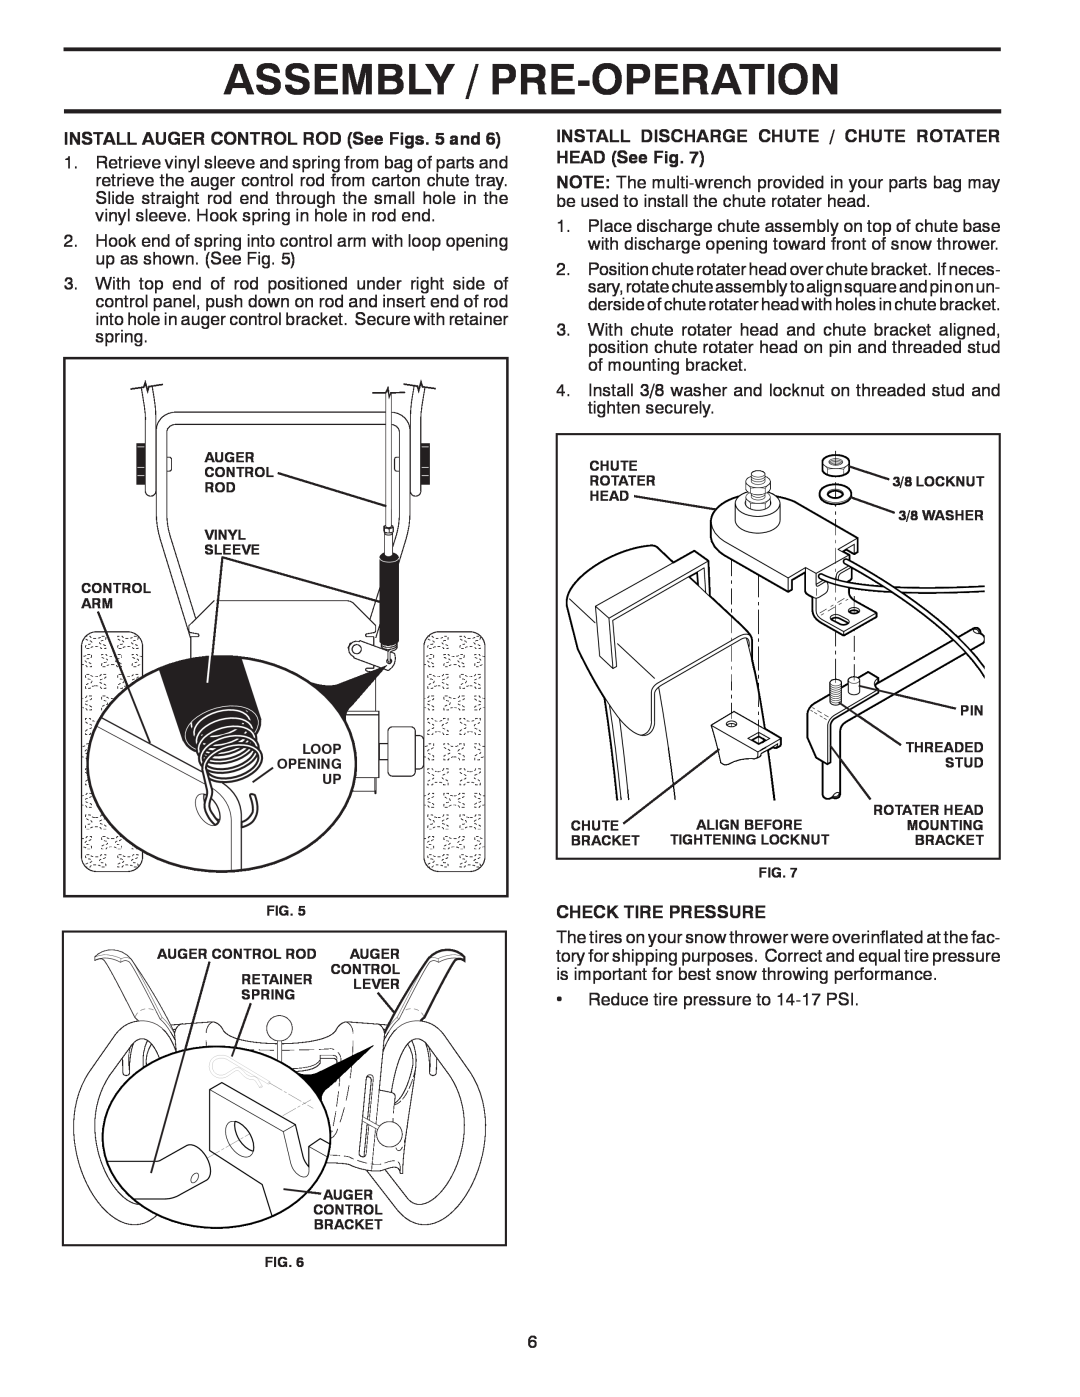 Poulan 430442, 96192002802 Assembly / Pre-Operation, INSTALL AUGER CONTROL ROD See Figs. 5 and, Check Tire Pressure 